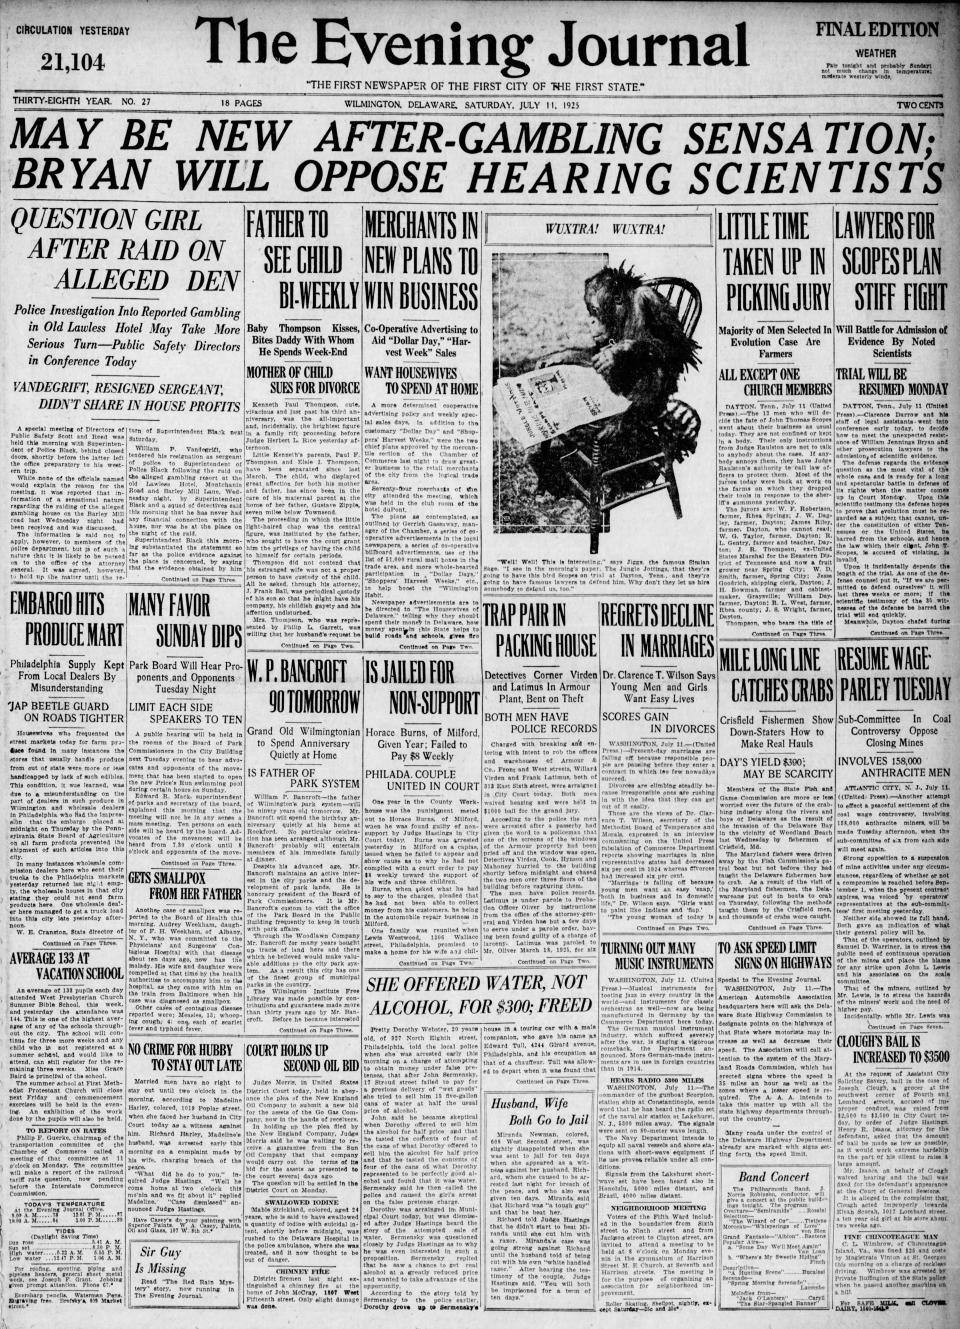 The front page of The Evening Journal from July 11, 1925.